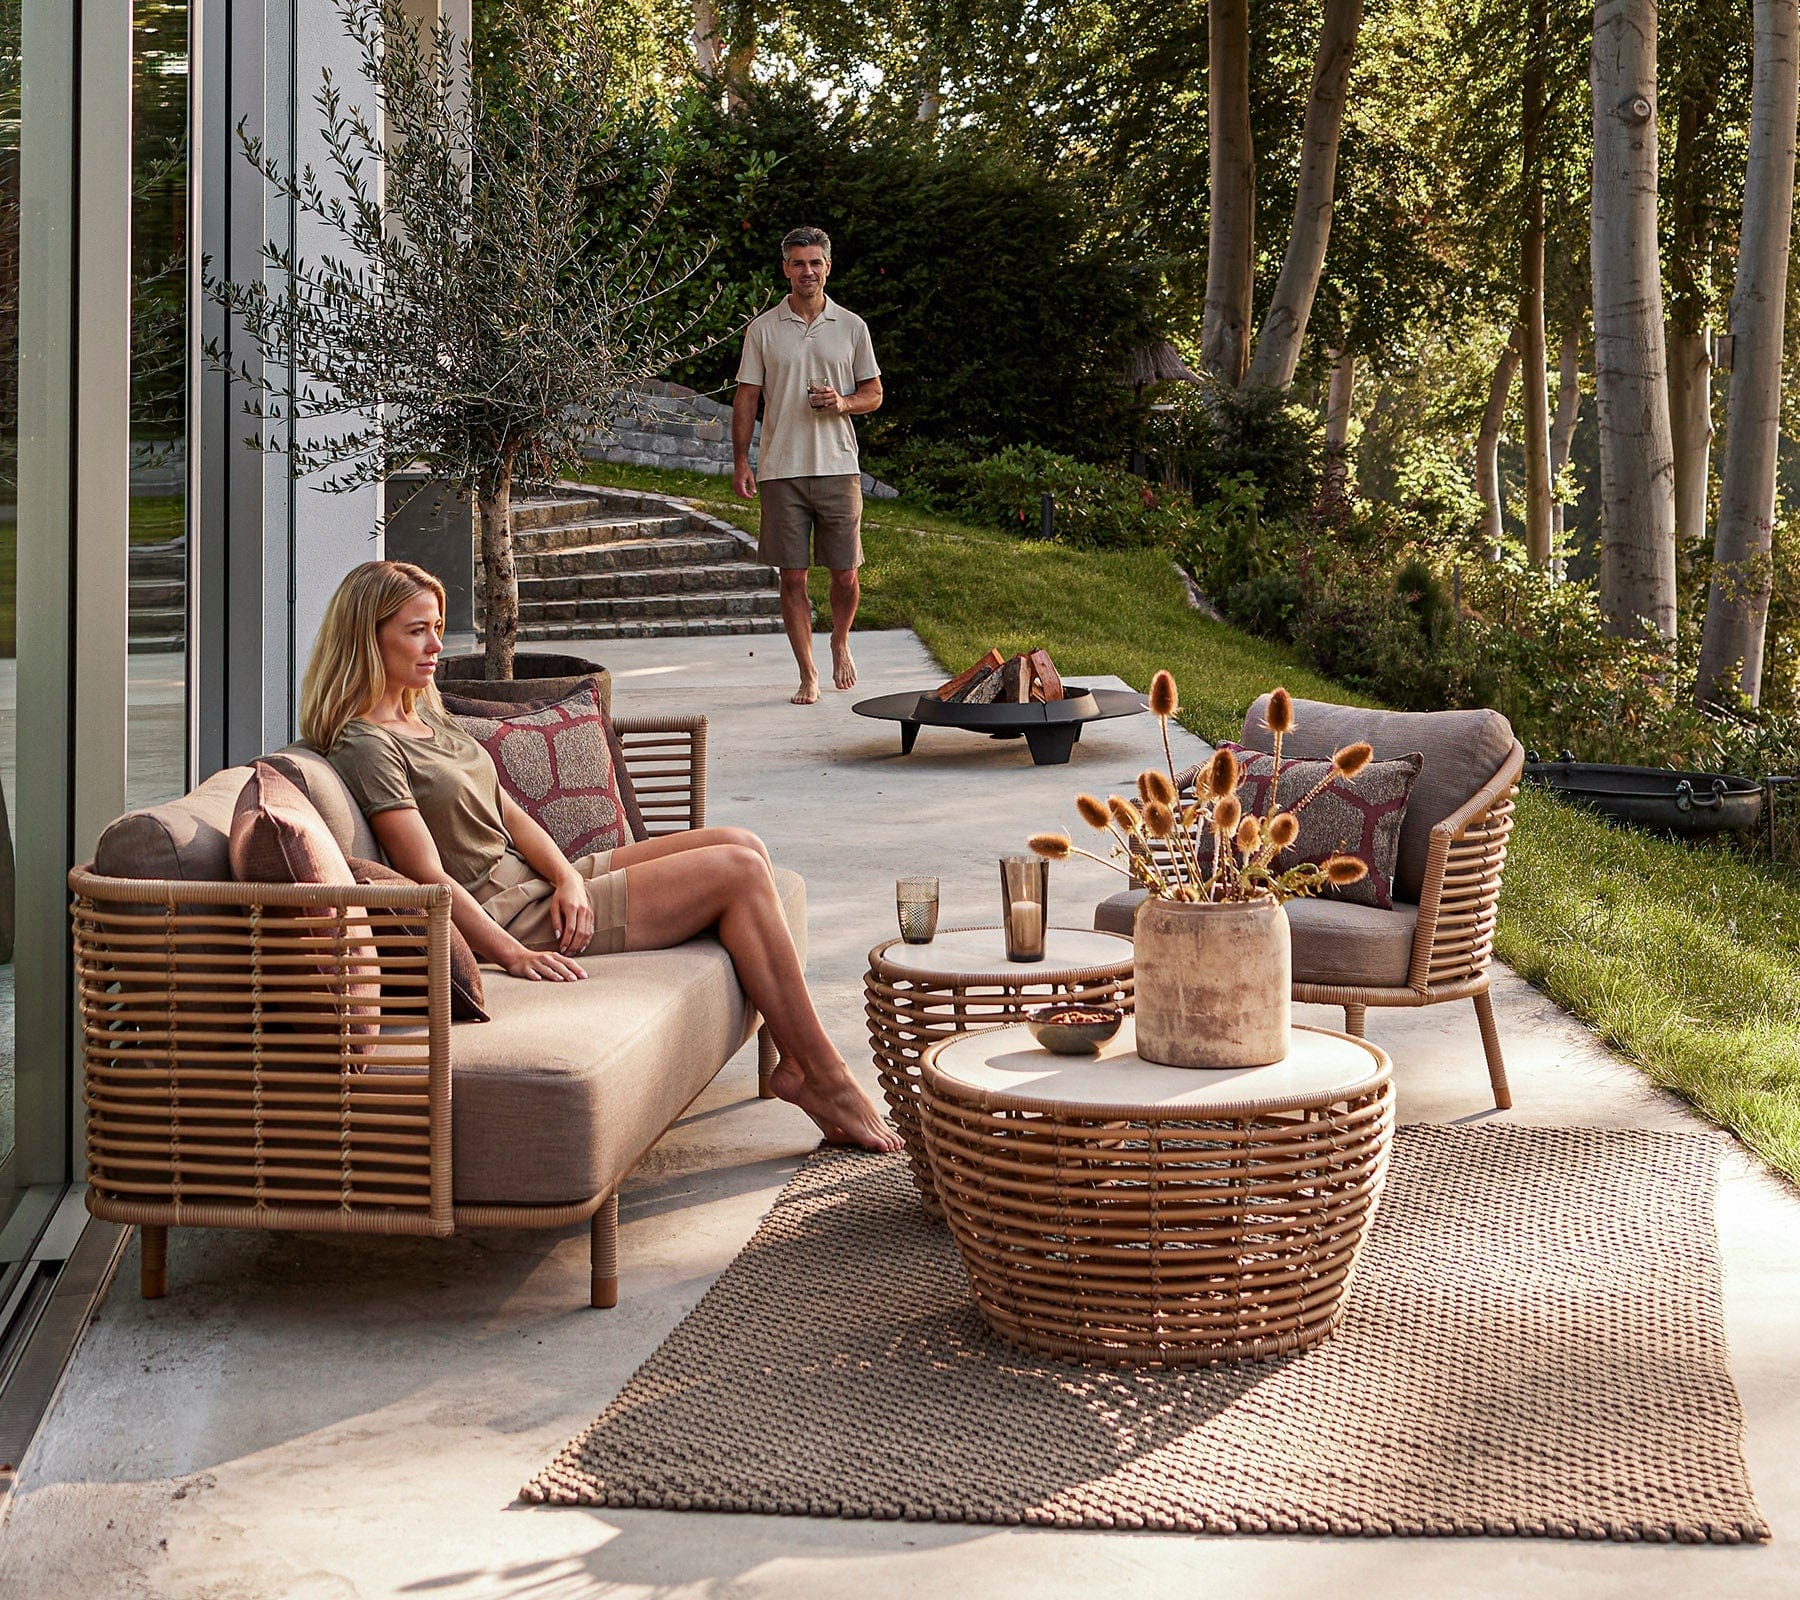 Cane-Line Denmark Cane-line Weave - Natural -incl. taupe Cane-line AirTouch Sense lounge chair OUTDOOR, incl. taupe Cane-line AirTouch cushions (7443)